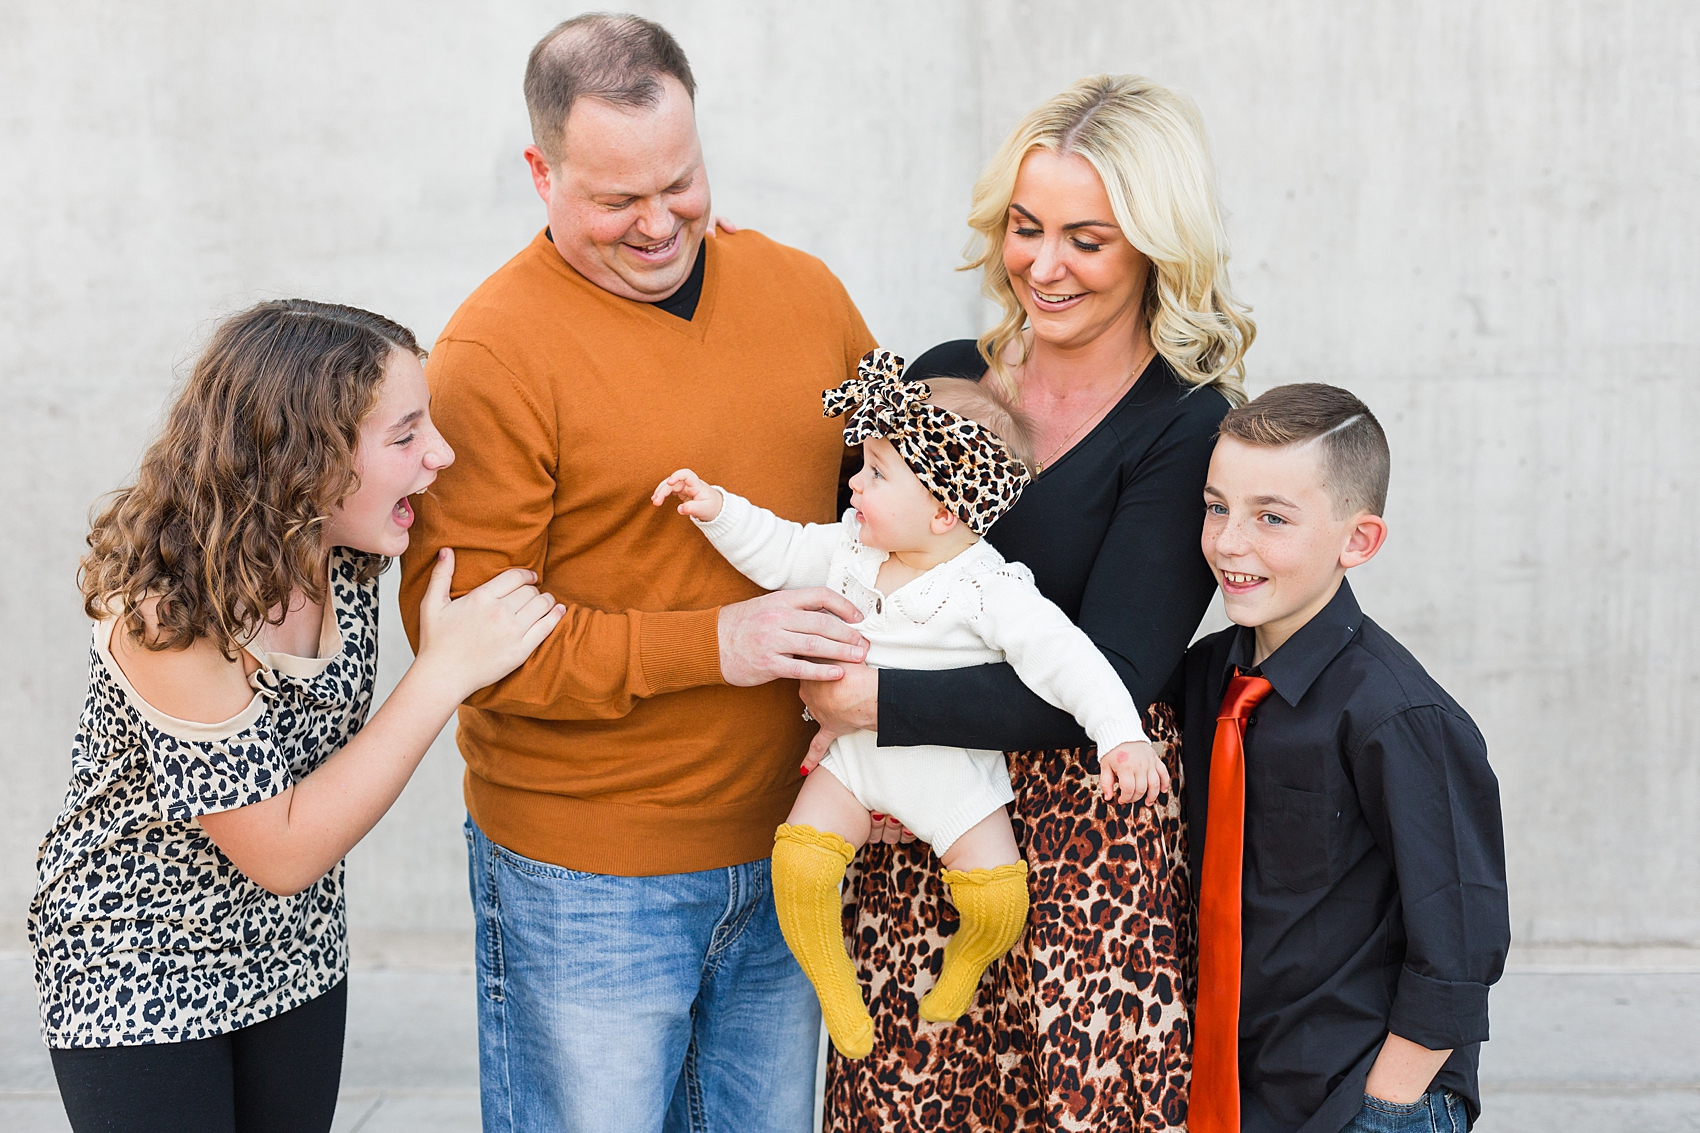 Leah Hope Photography | Downtown Phoenix Arizona | Arizona Science Center | Family Pictures | What to Wear | Family Poses | Solid Gray Background